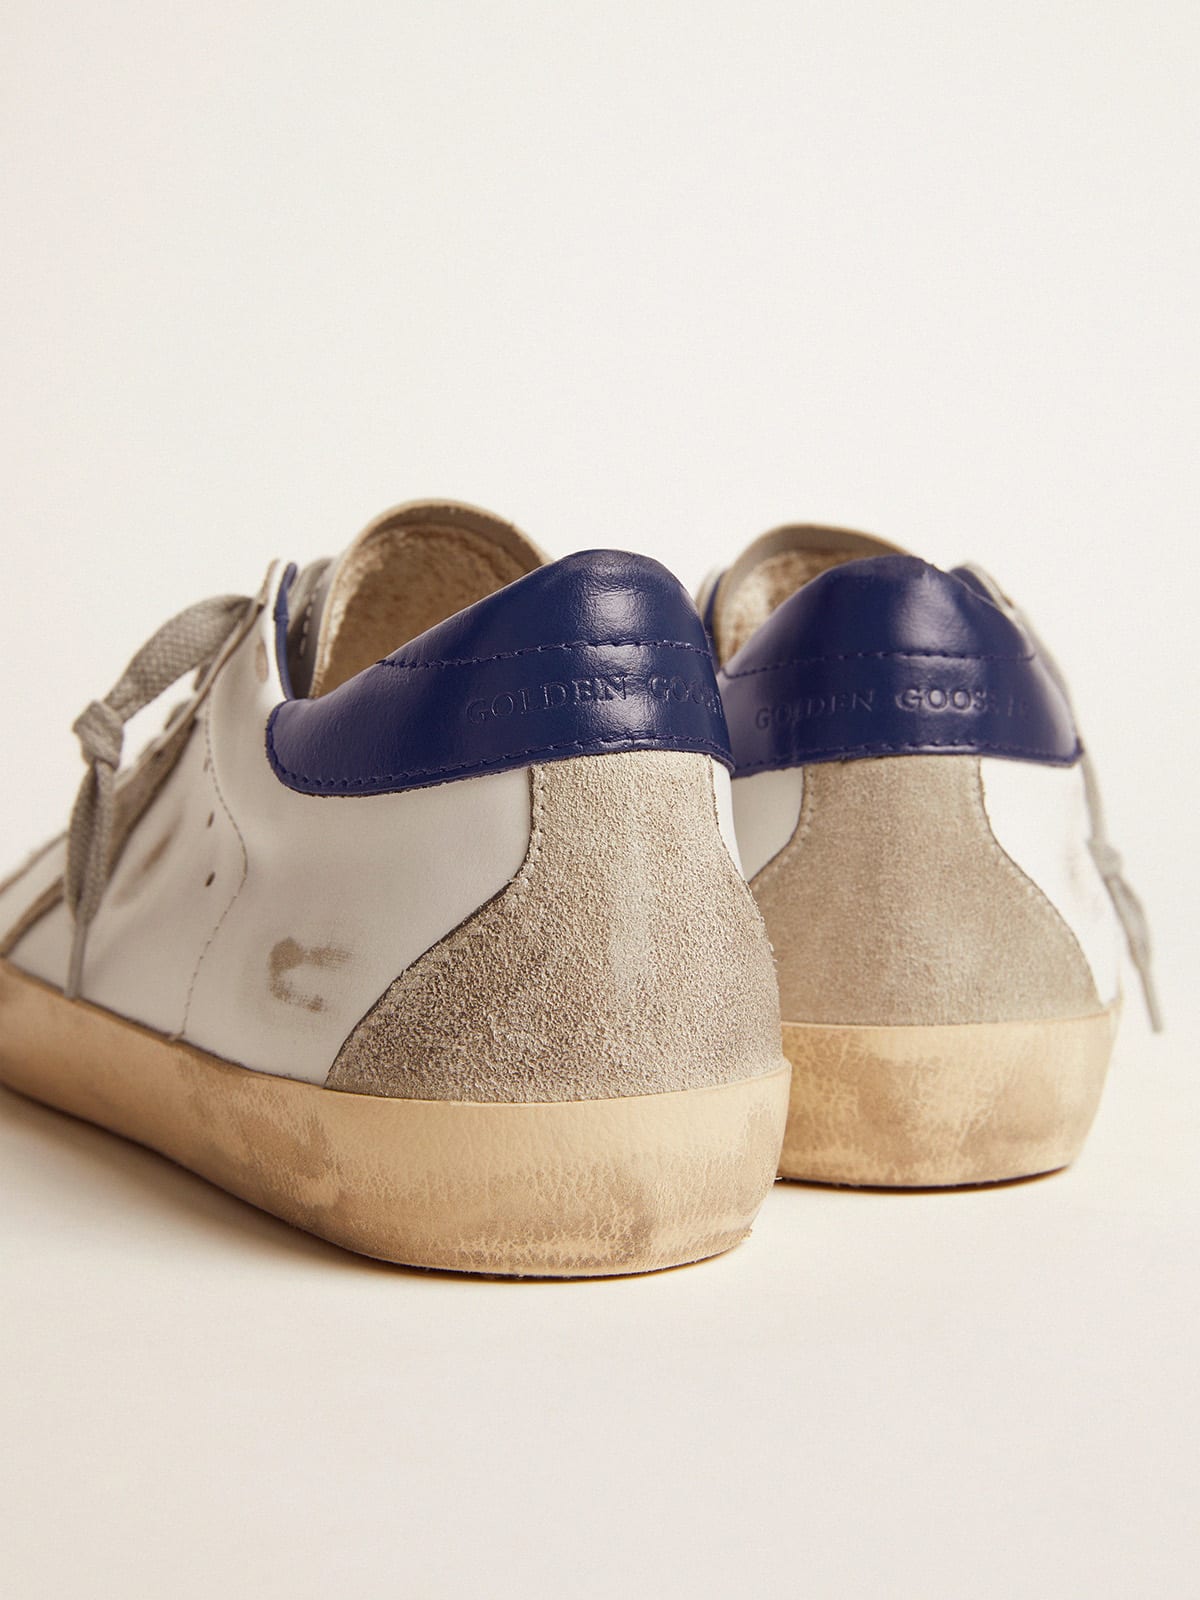 Golden Goose - Men's Super-Star with suede star and blue heel tab in 